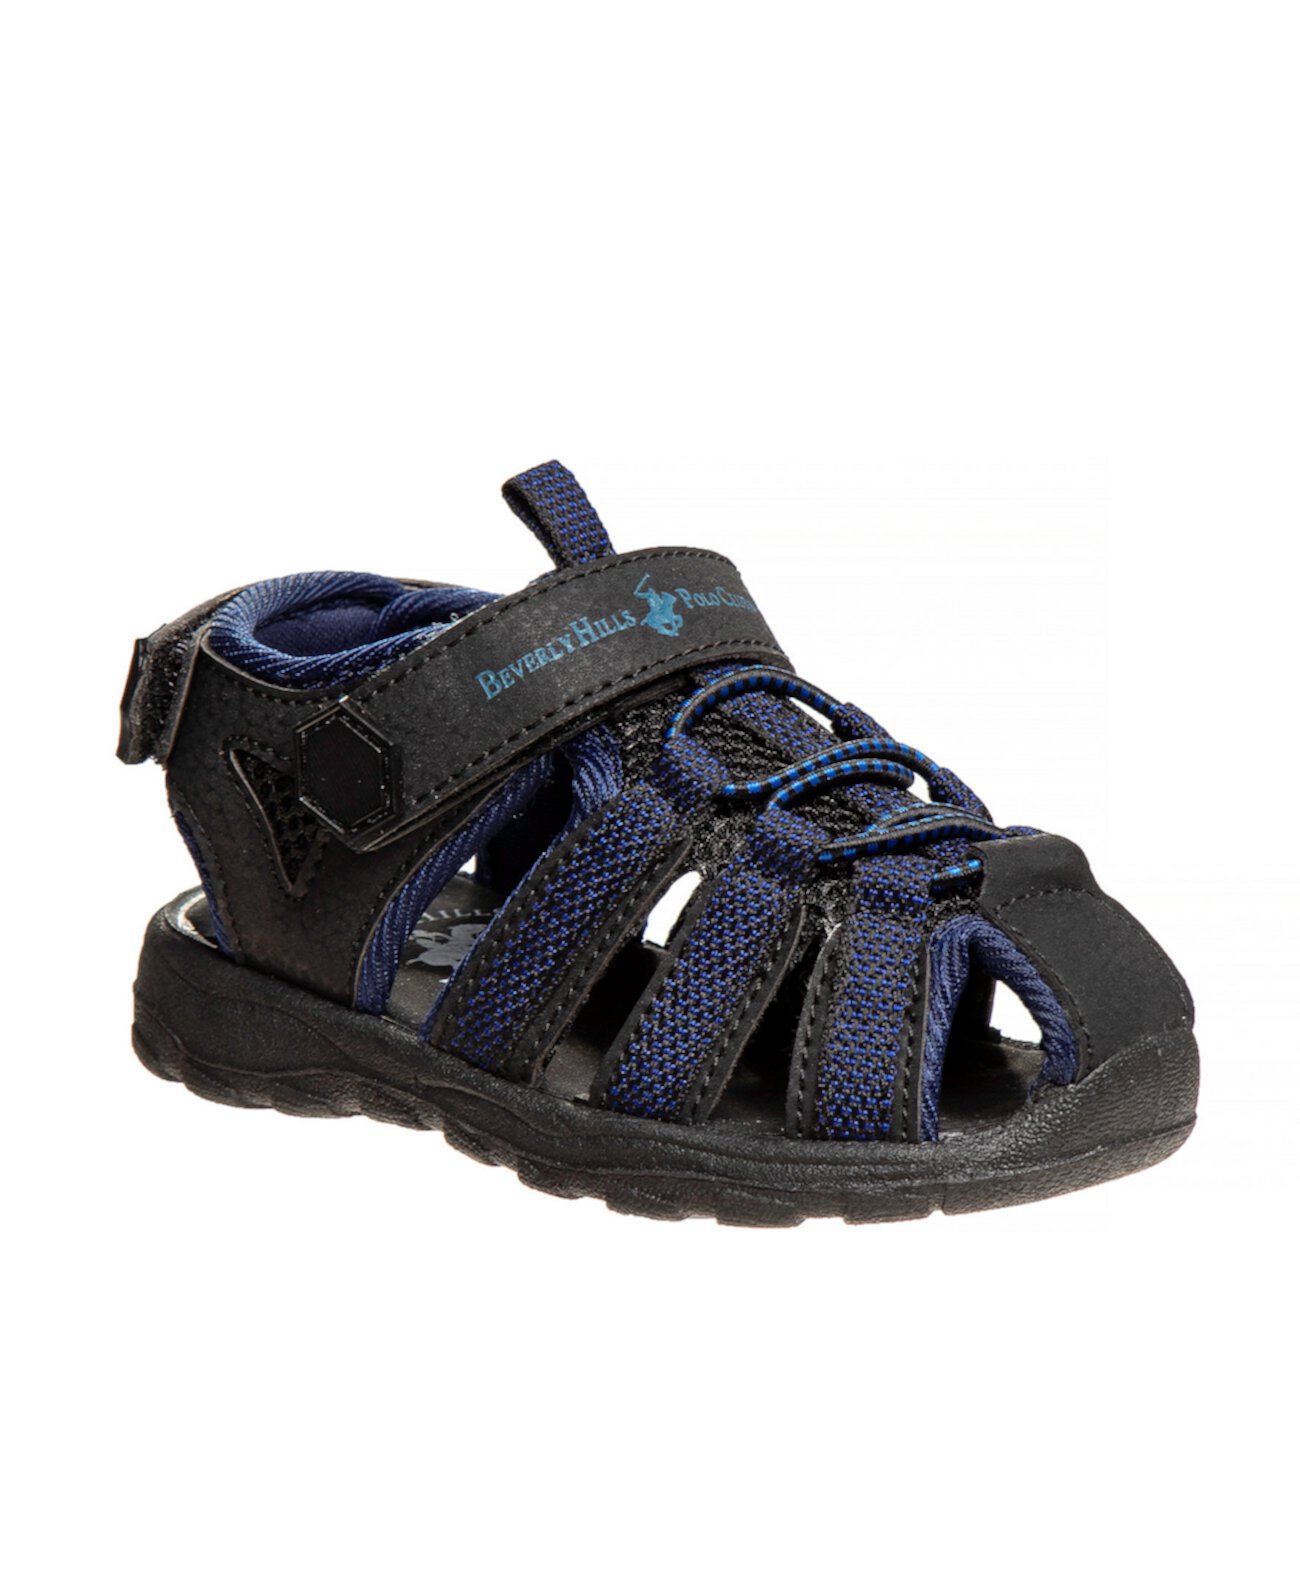 Toddler Hook and Loop Sandals Beverly Hills Polo